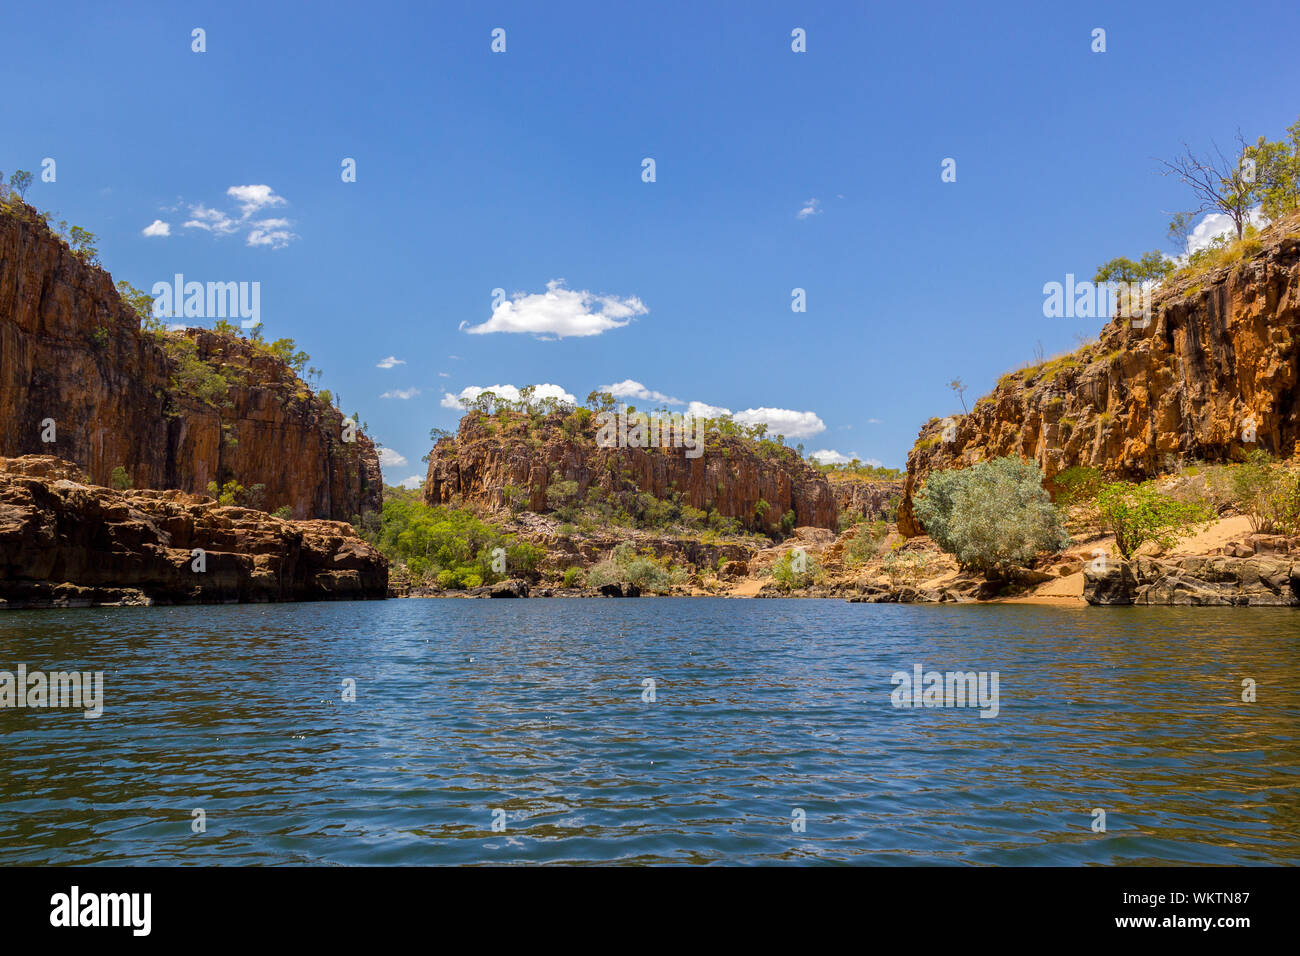 Katherine Gorge on an early morning cruise up the river with wonder reflections and beautiful scenery, Northern Territory Stock Photo